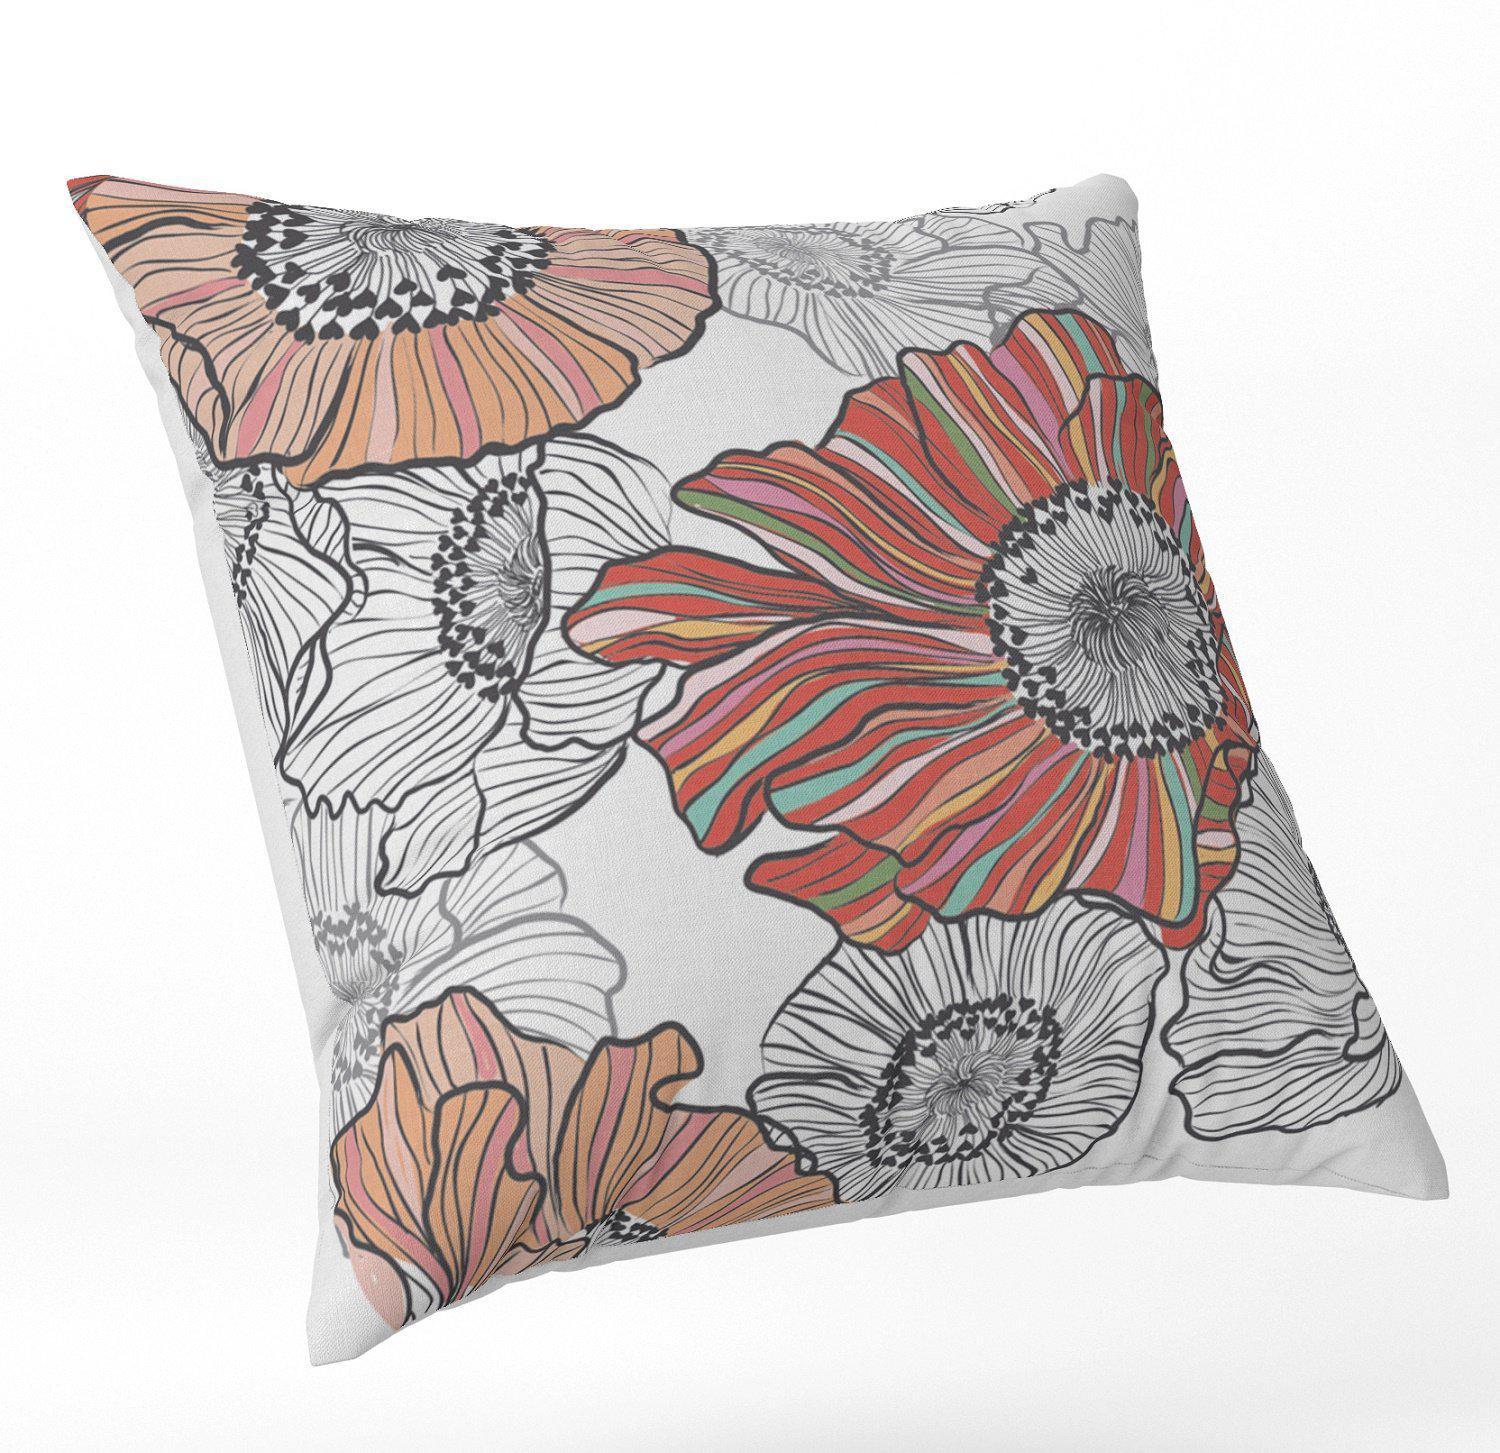 Candy Stripe Poppies (White) - Funky Art Cushion - Paradise Garden - House Of Turnowsky Pillows - Handmade Cushions UK - WeLoveCushions